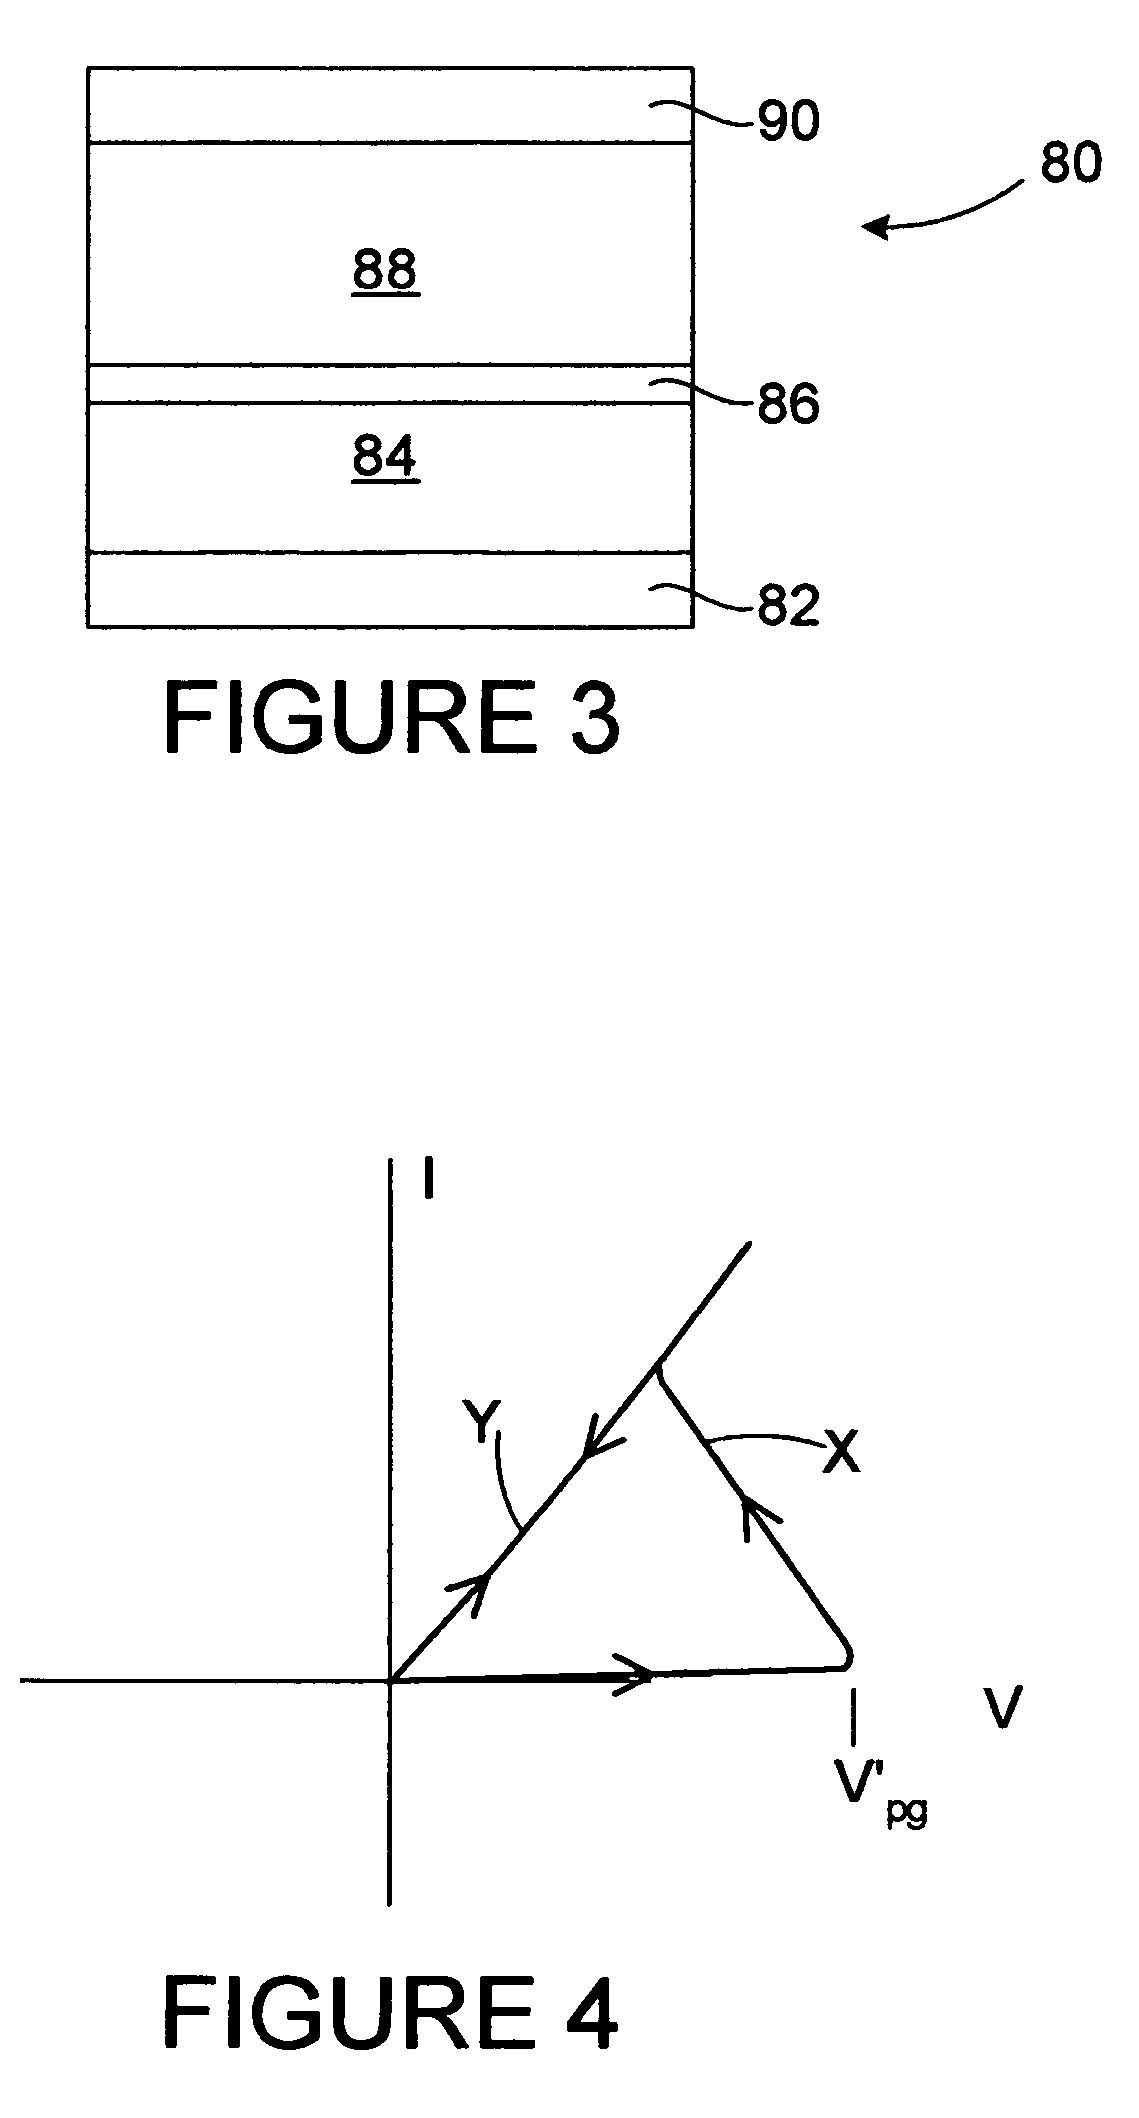 Memory device including barrier layer for improved switching speed and data retention